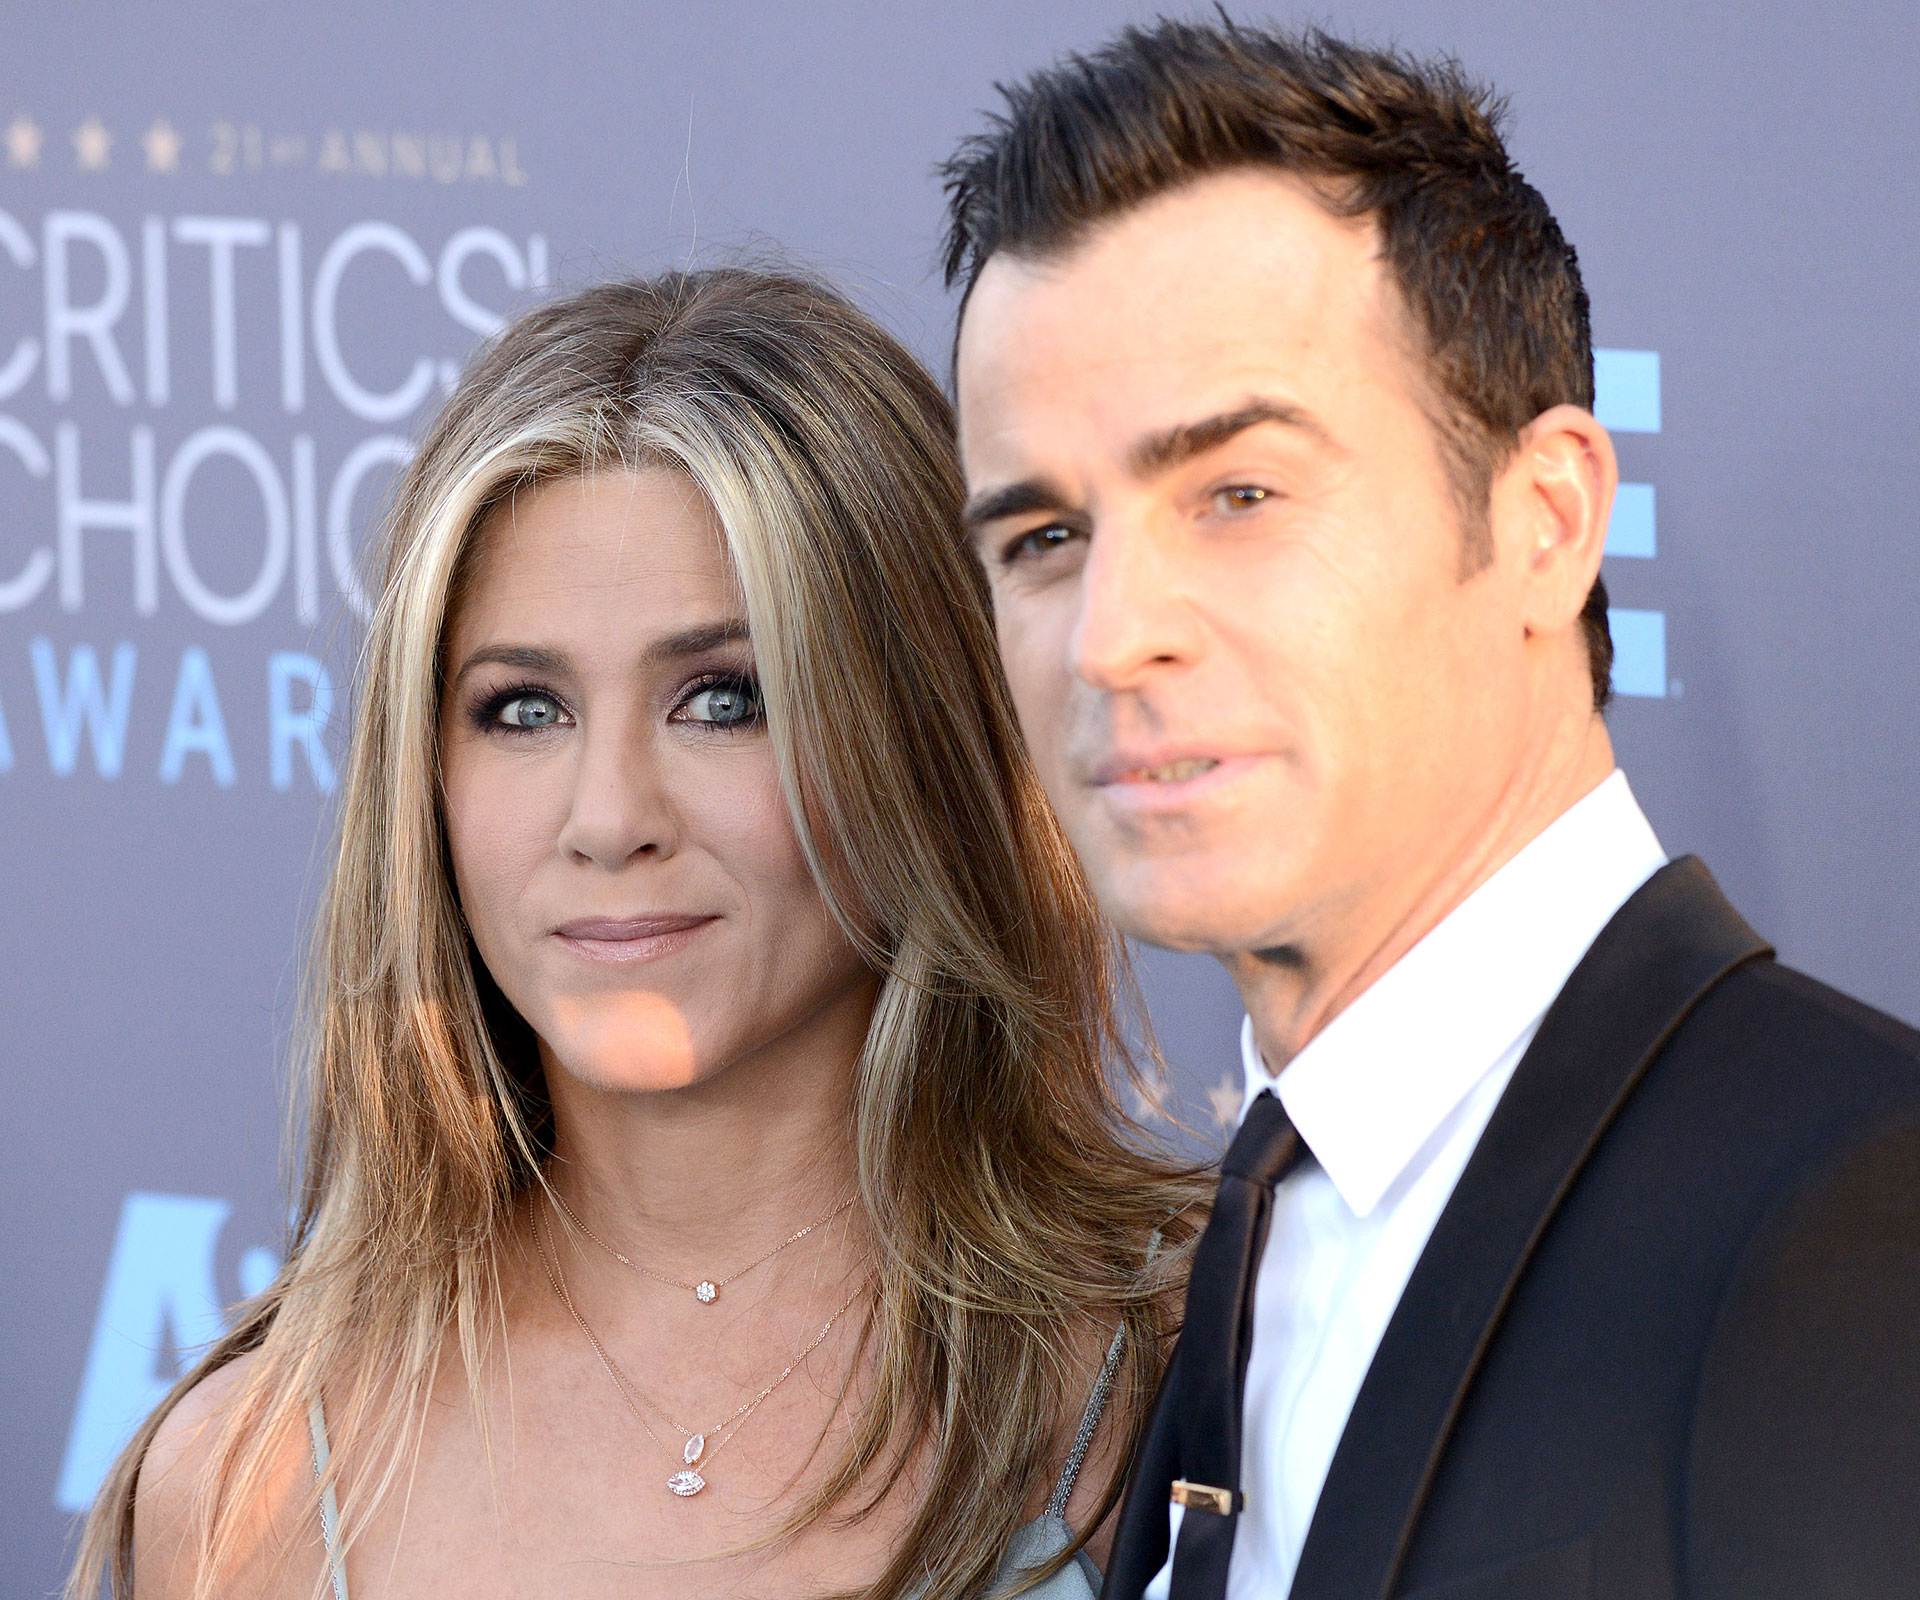 We don’t know why but Justin Theroux just weighed in on the Brangelina split